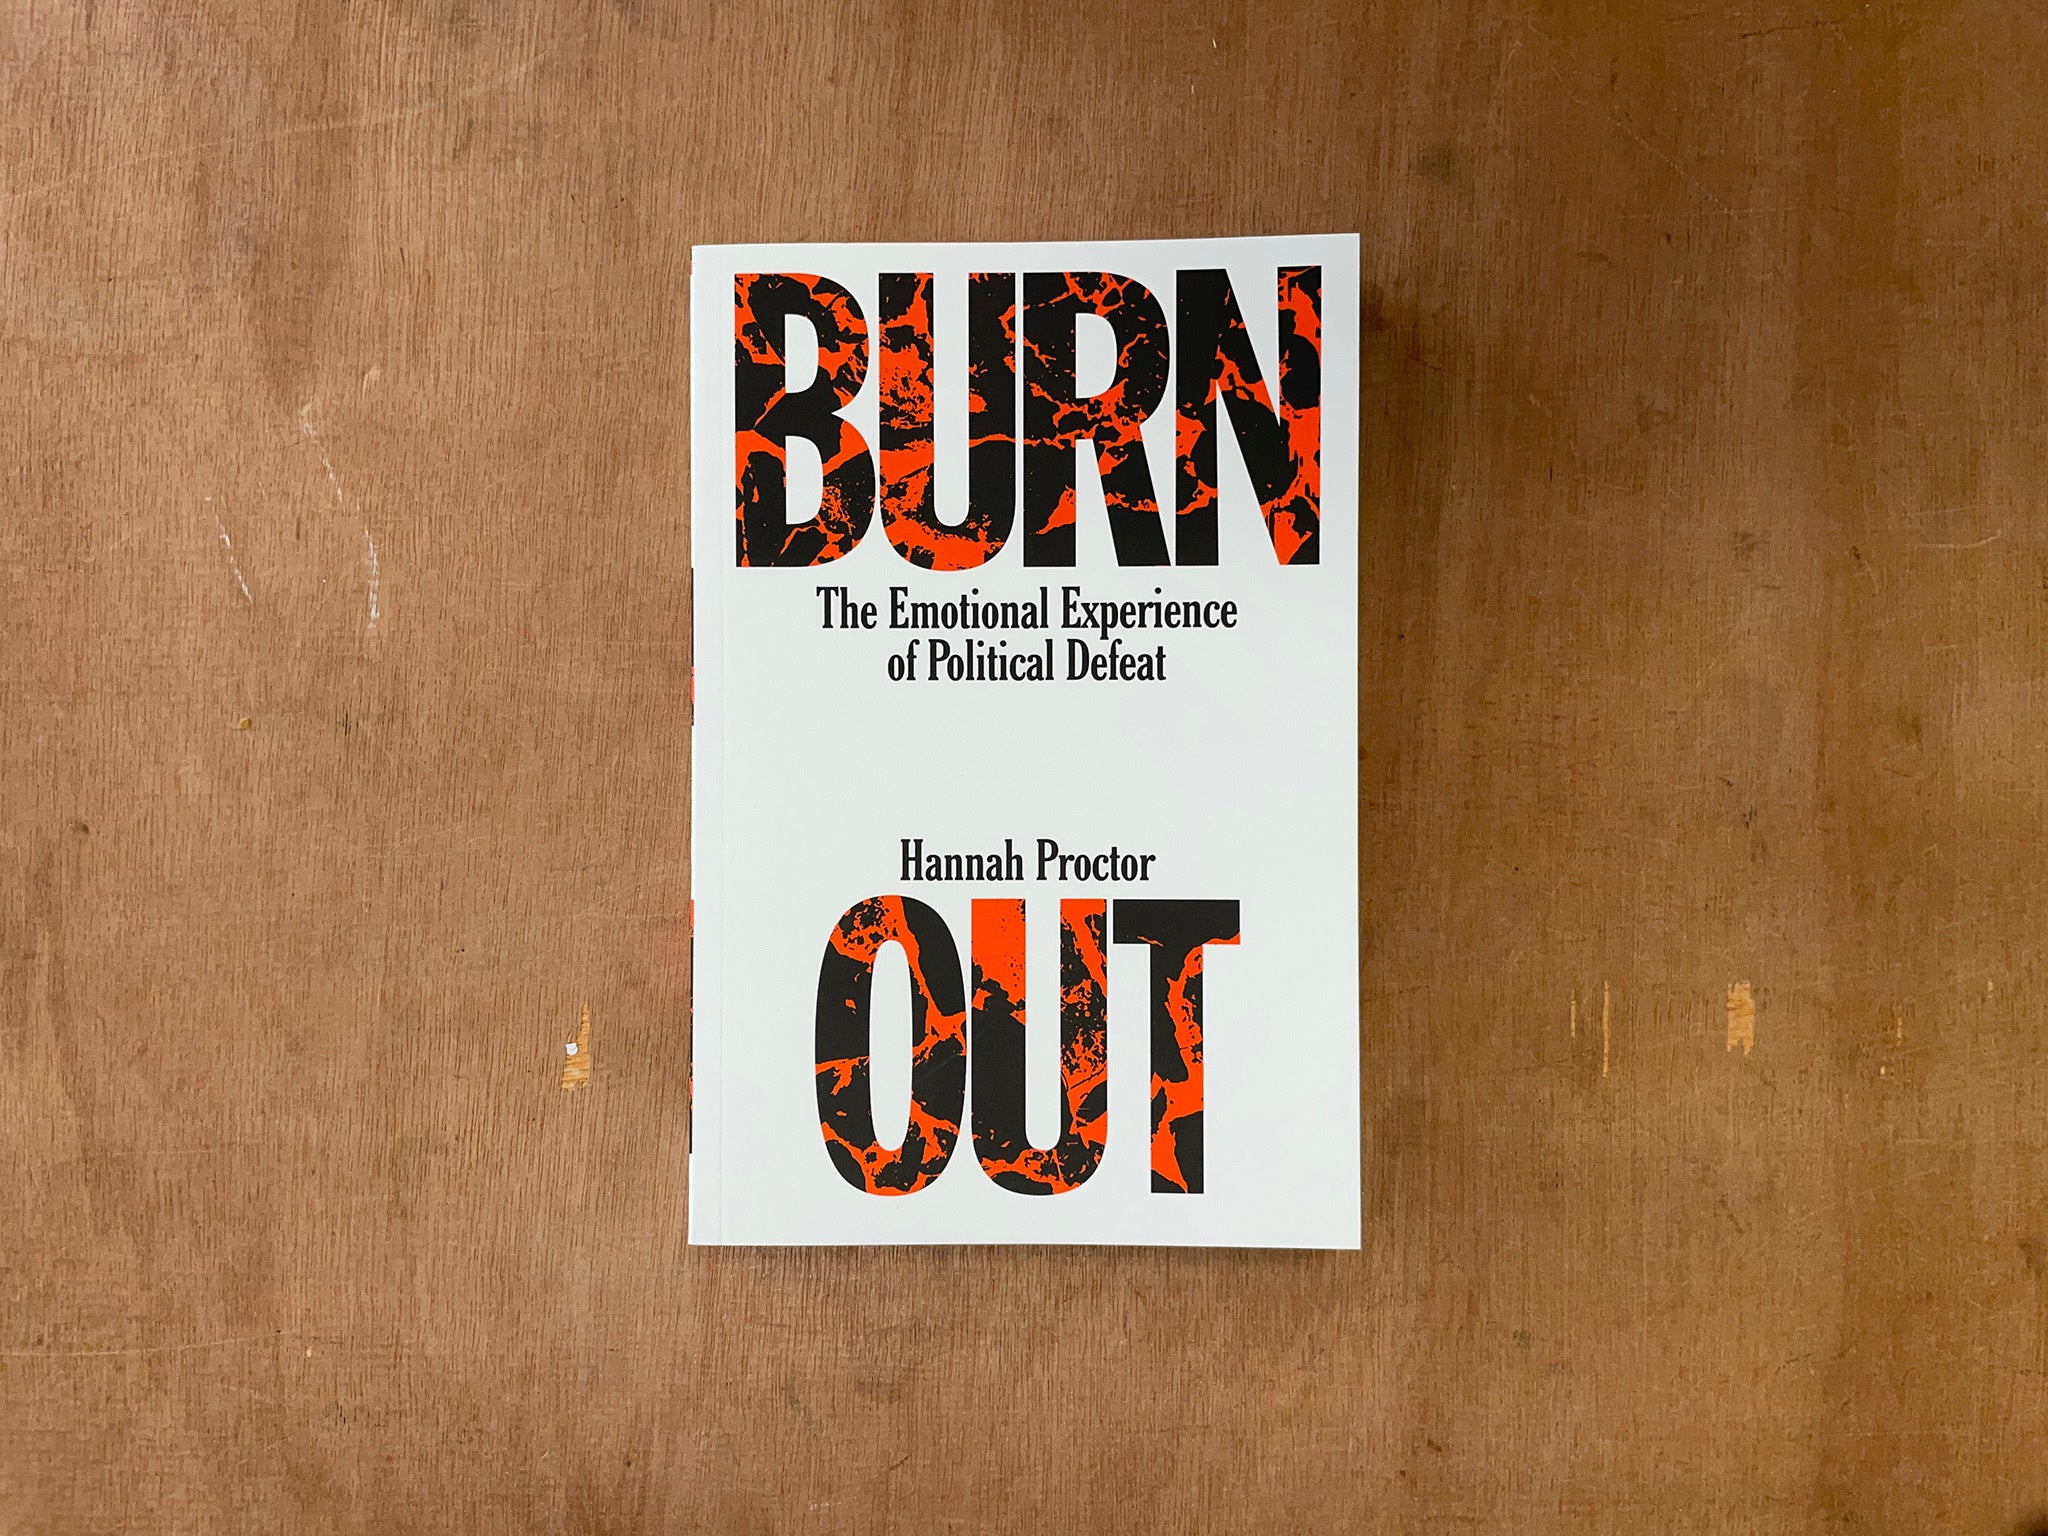 BURNOUT: THE EMOTIONAL EXPERIENCE OF POLITICAL DEFEAT by Hannah Proctor